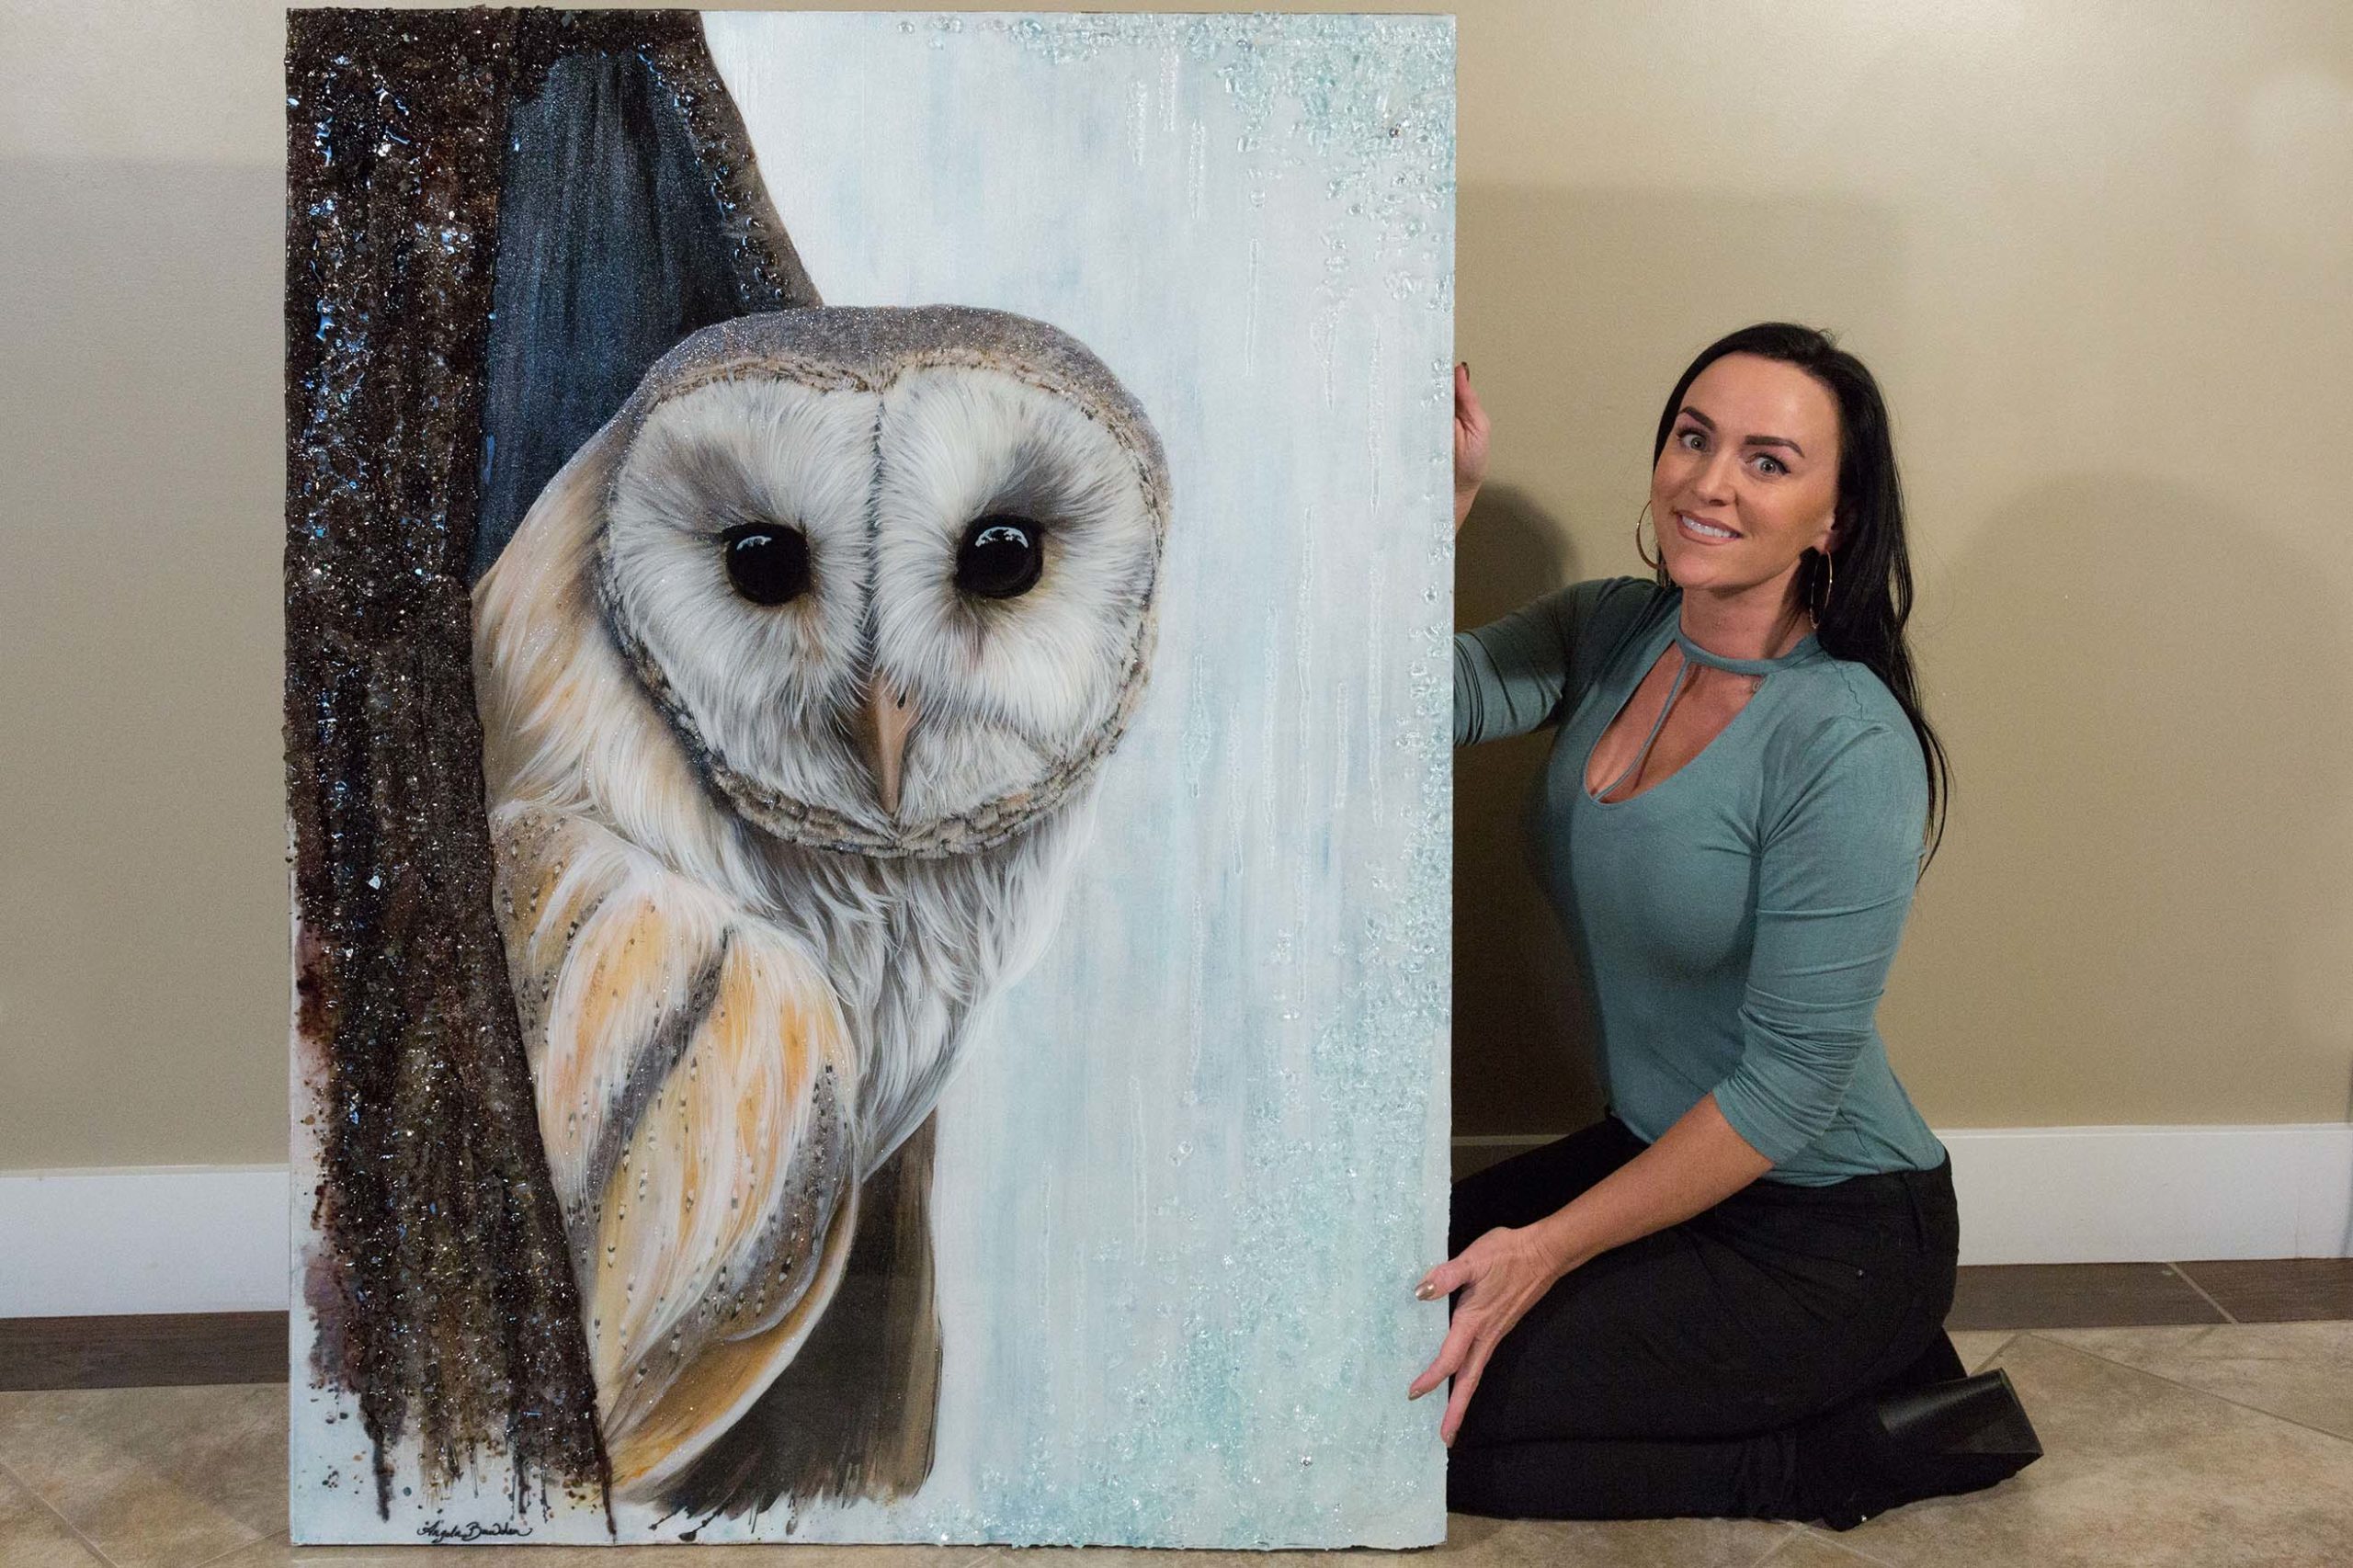 Angela with her Painting Watcher from the Hollow